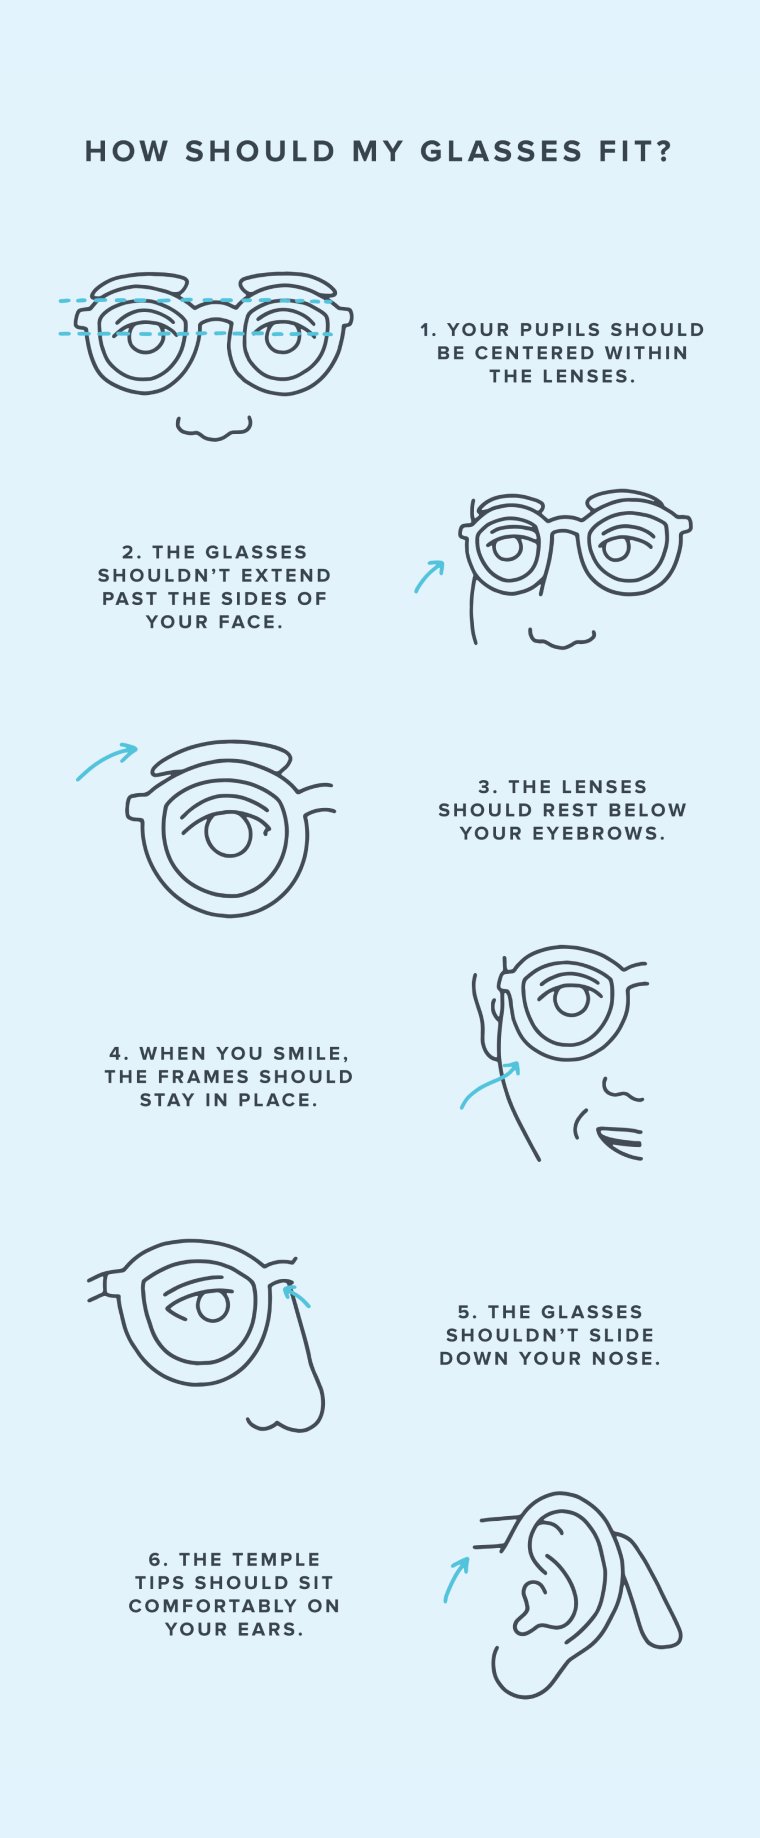 Infographic detailing guidelines for ensuring glasses fit